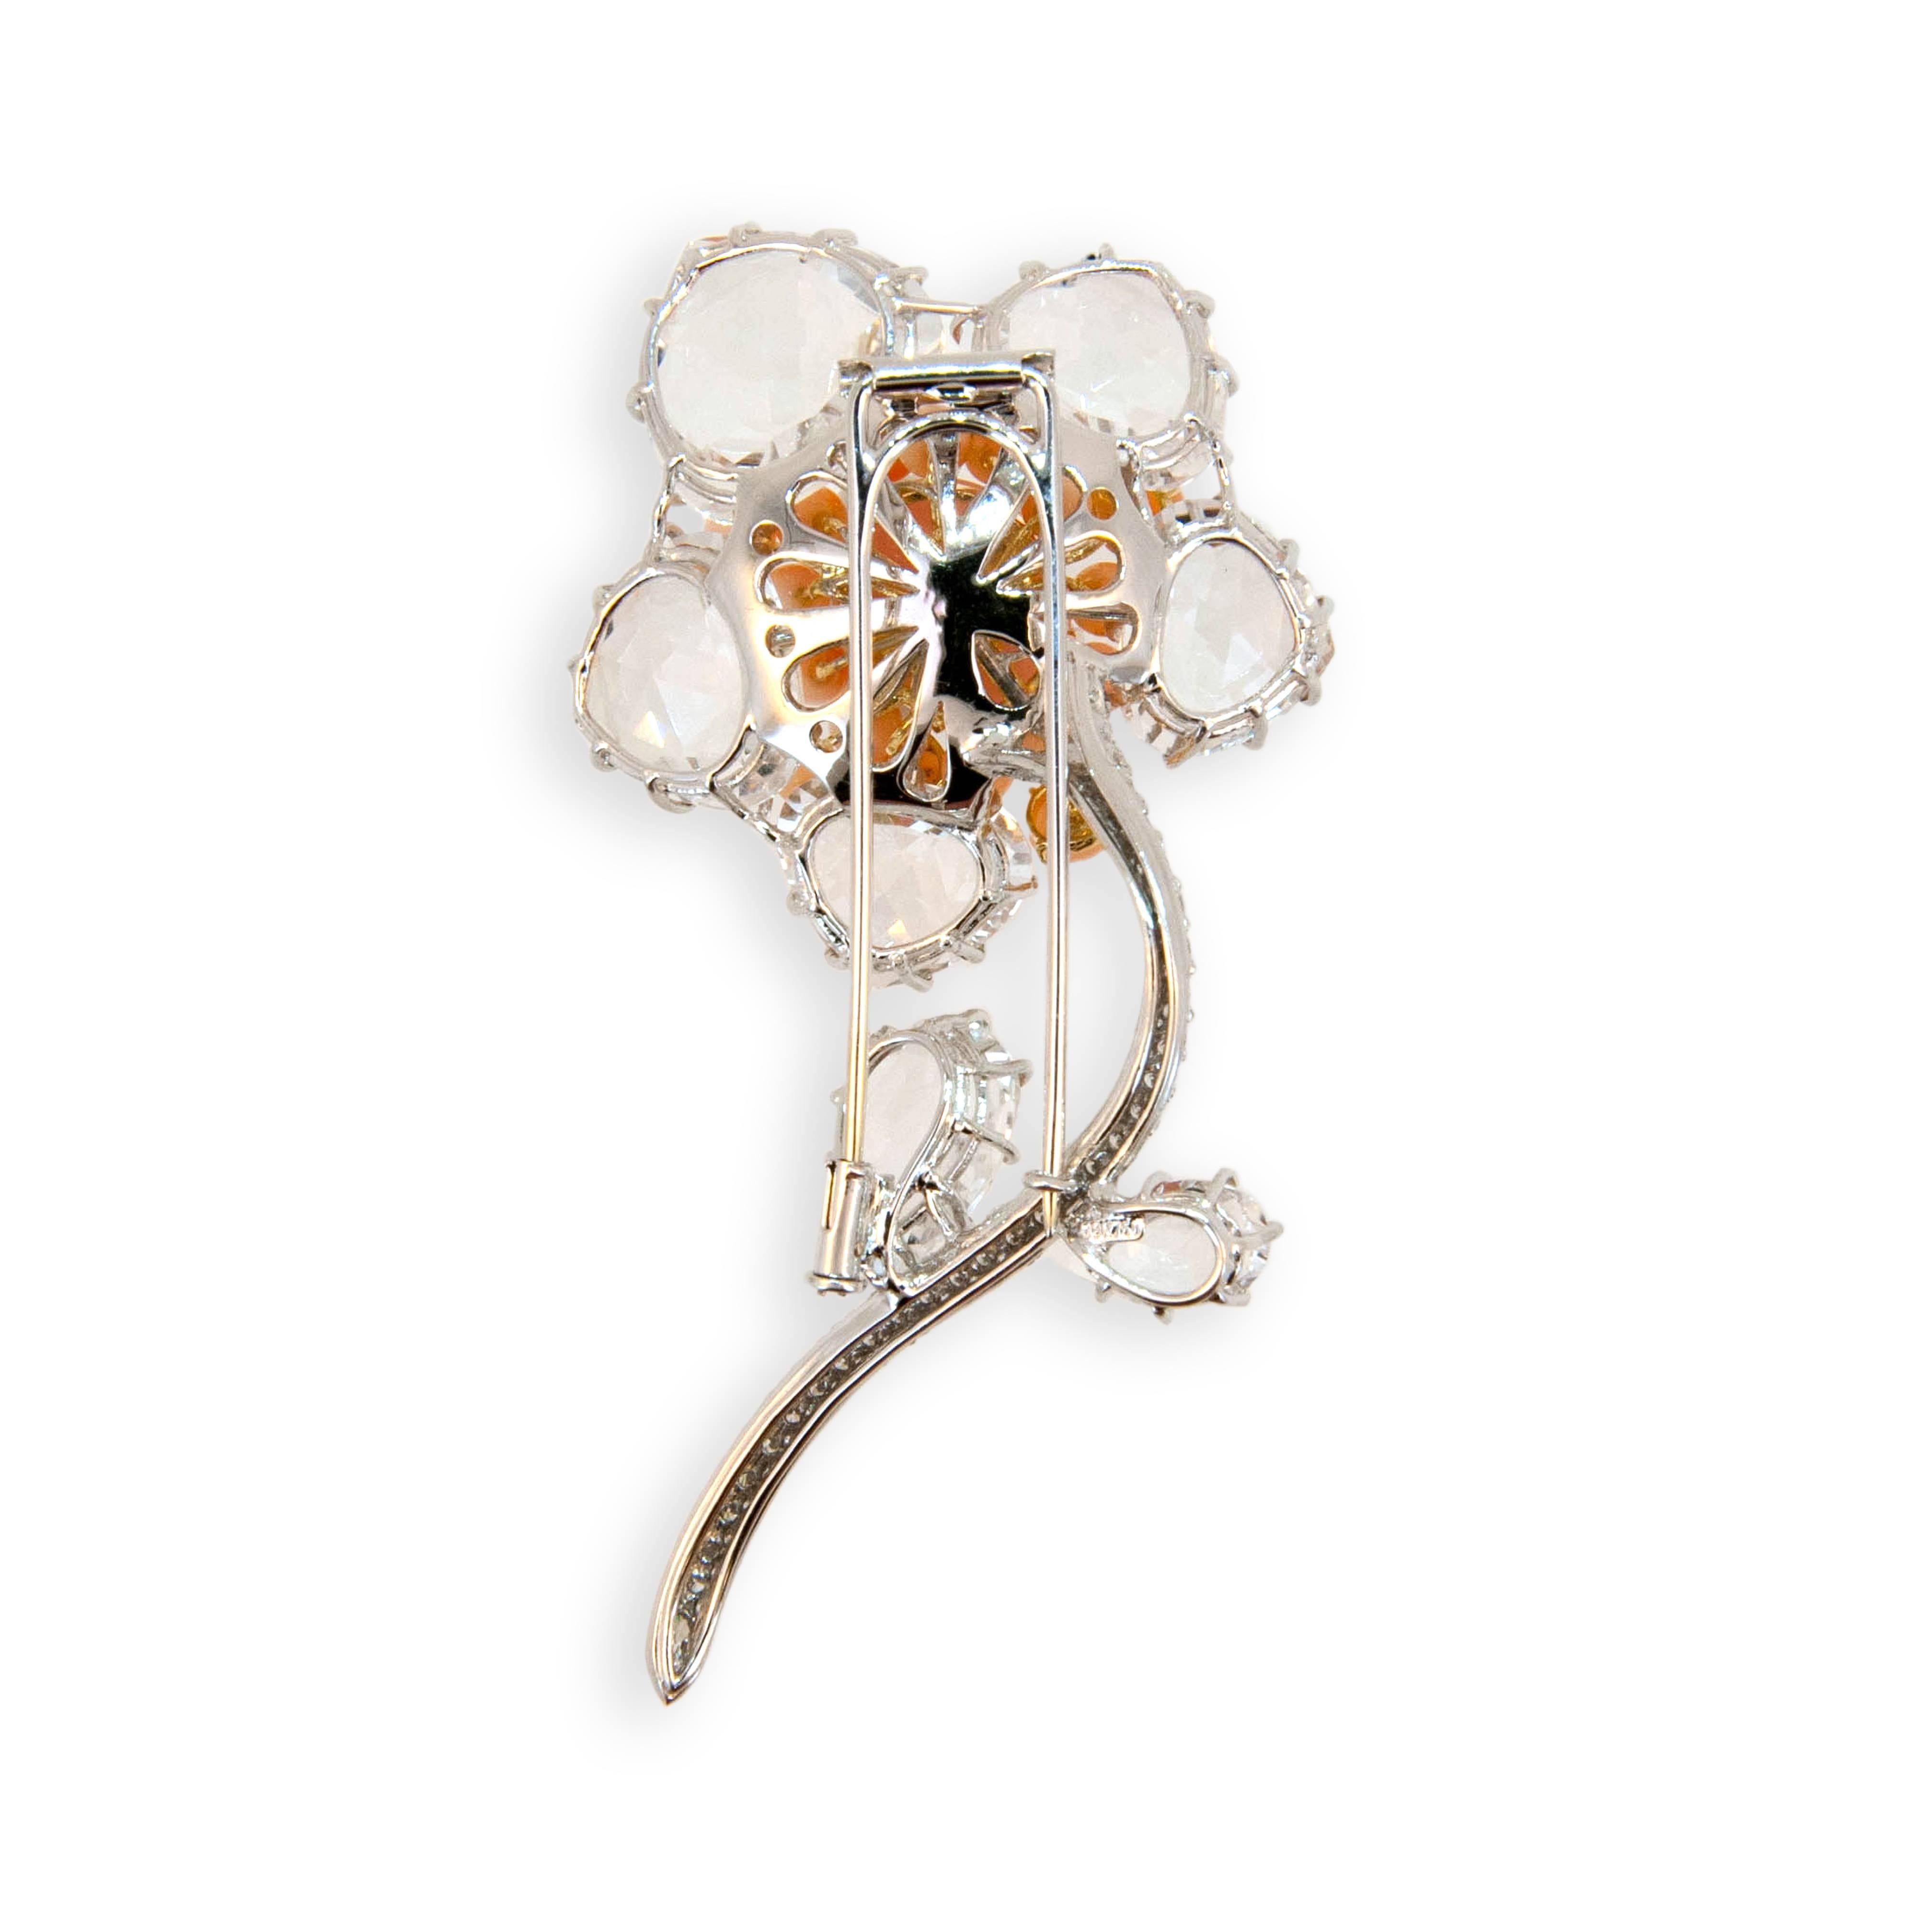 18 karat white gold brooch flower design set with one Pink Opal cab 7.62 carats total weight. Seventeen Coral beads 1.16 grams, seven crystals, one Marquise Diamond .10 carats and ninety-five round diamonds 1.14 carats total weight.
